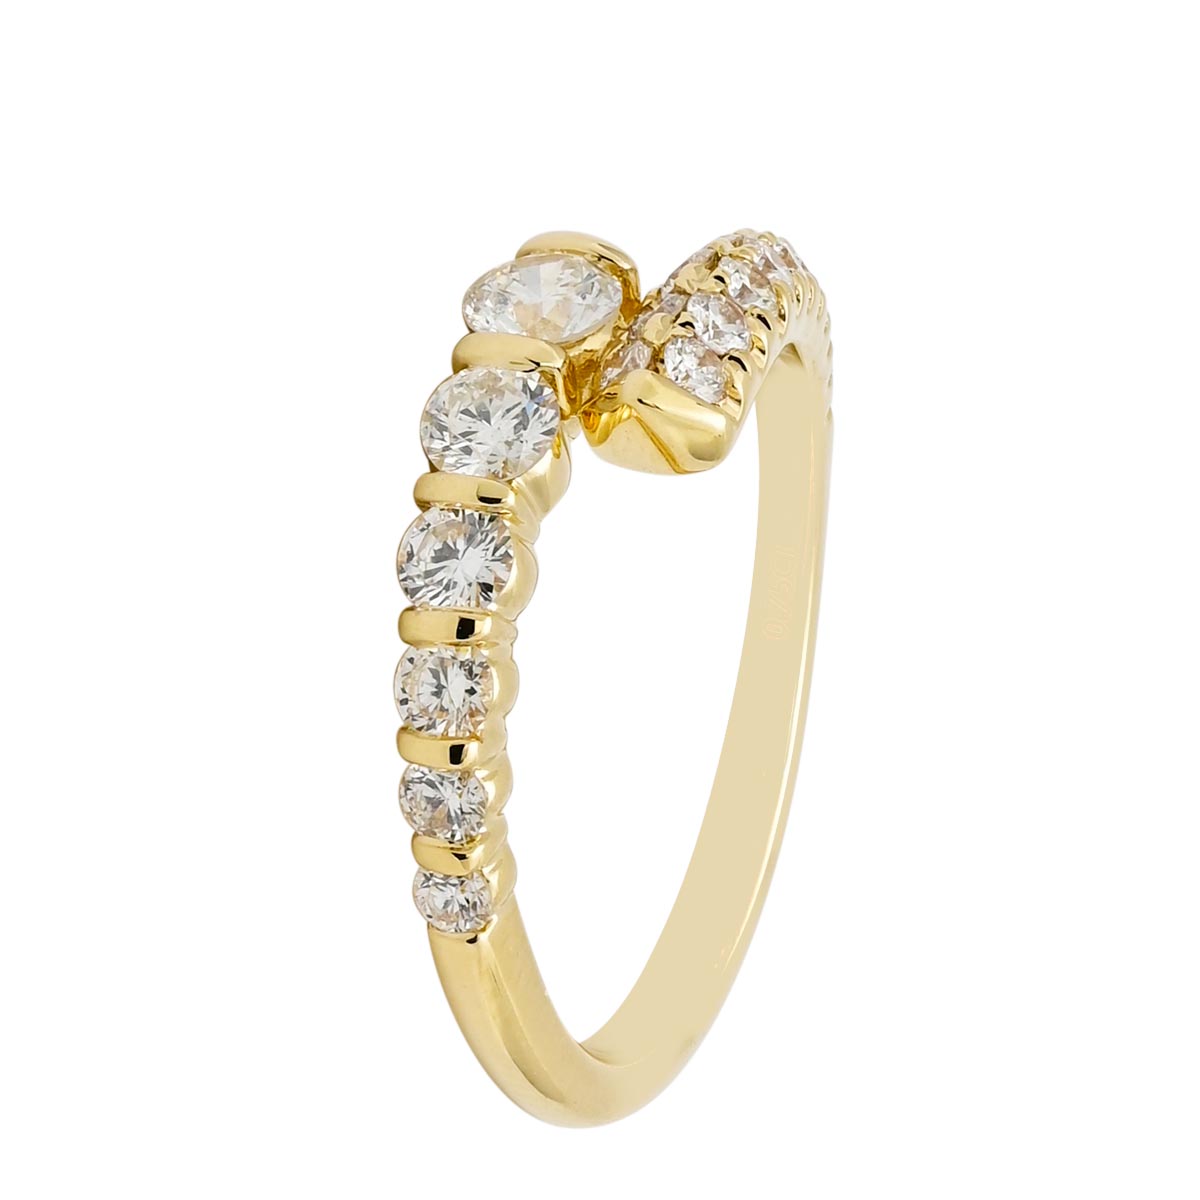 Northern Star Diamond Fashion Ring in 14kt Yellow Gold (3/4ct tw)